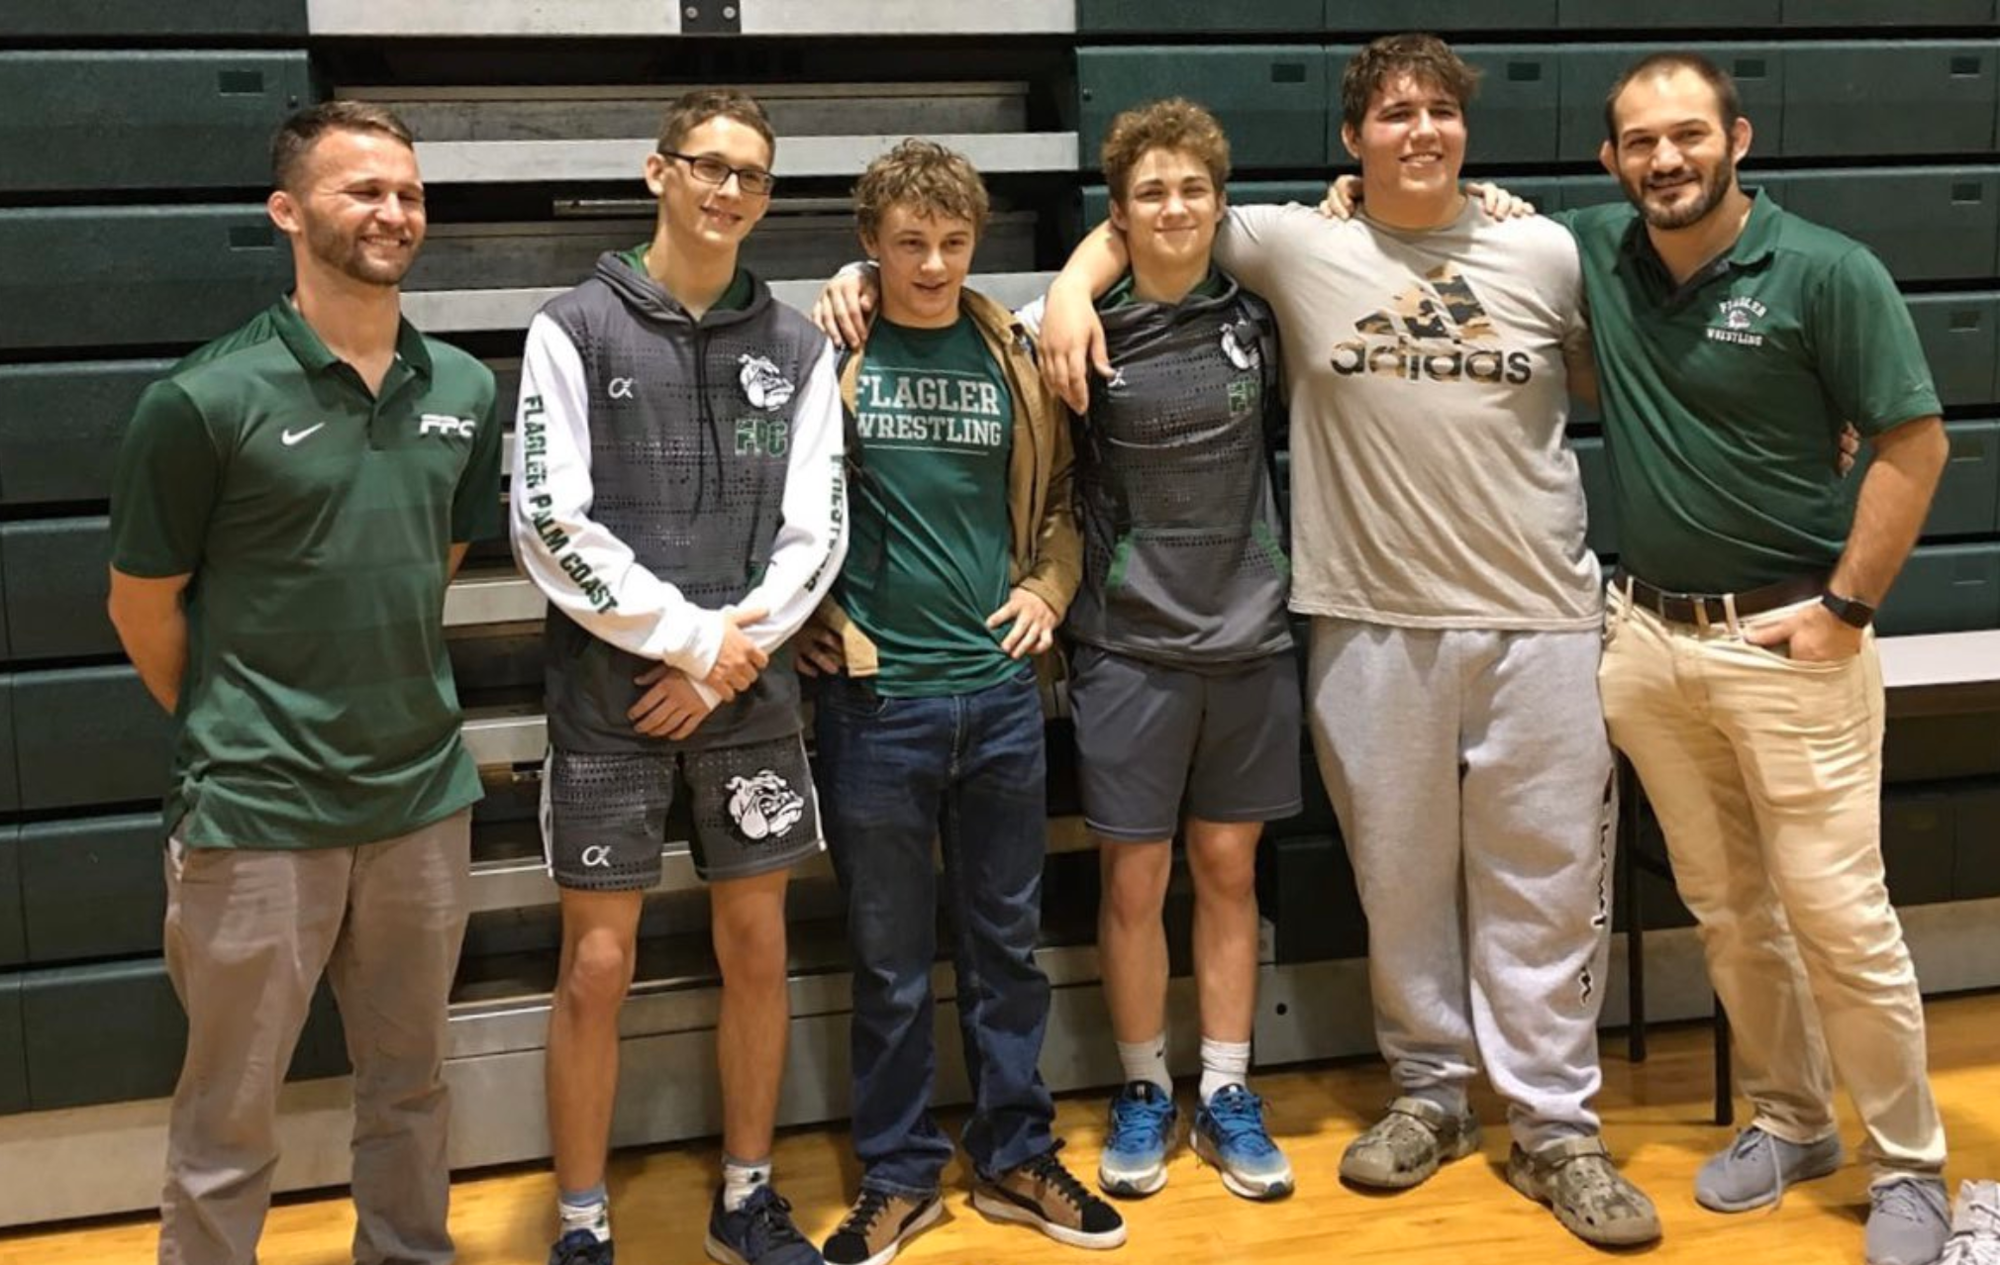 FPC state qualifiers Andrew Dance, Blane DeFord, Kyle Peacock and A.J. Cinelli. Courtesy photo